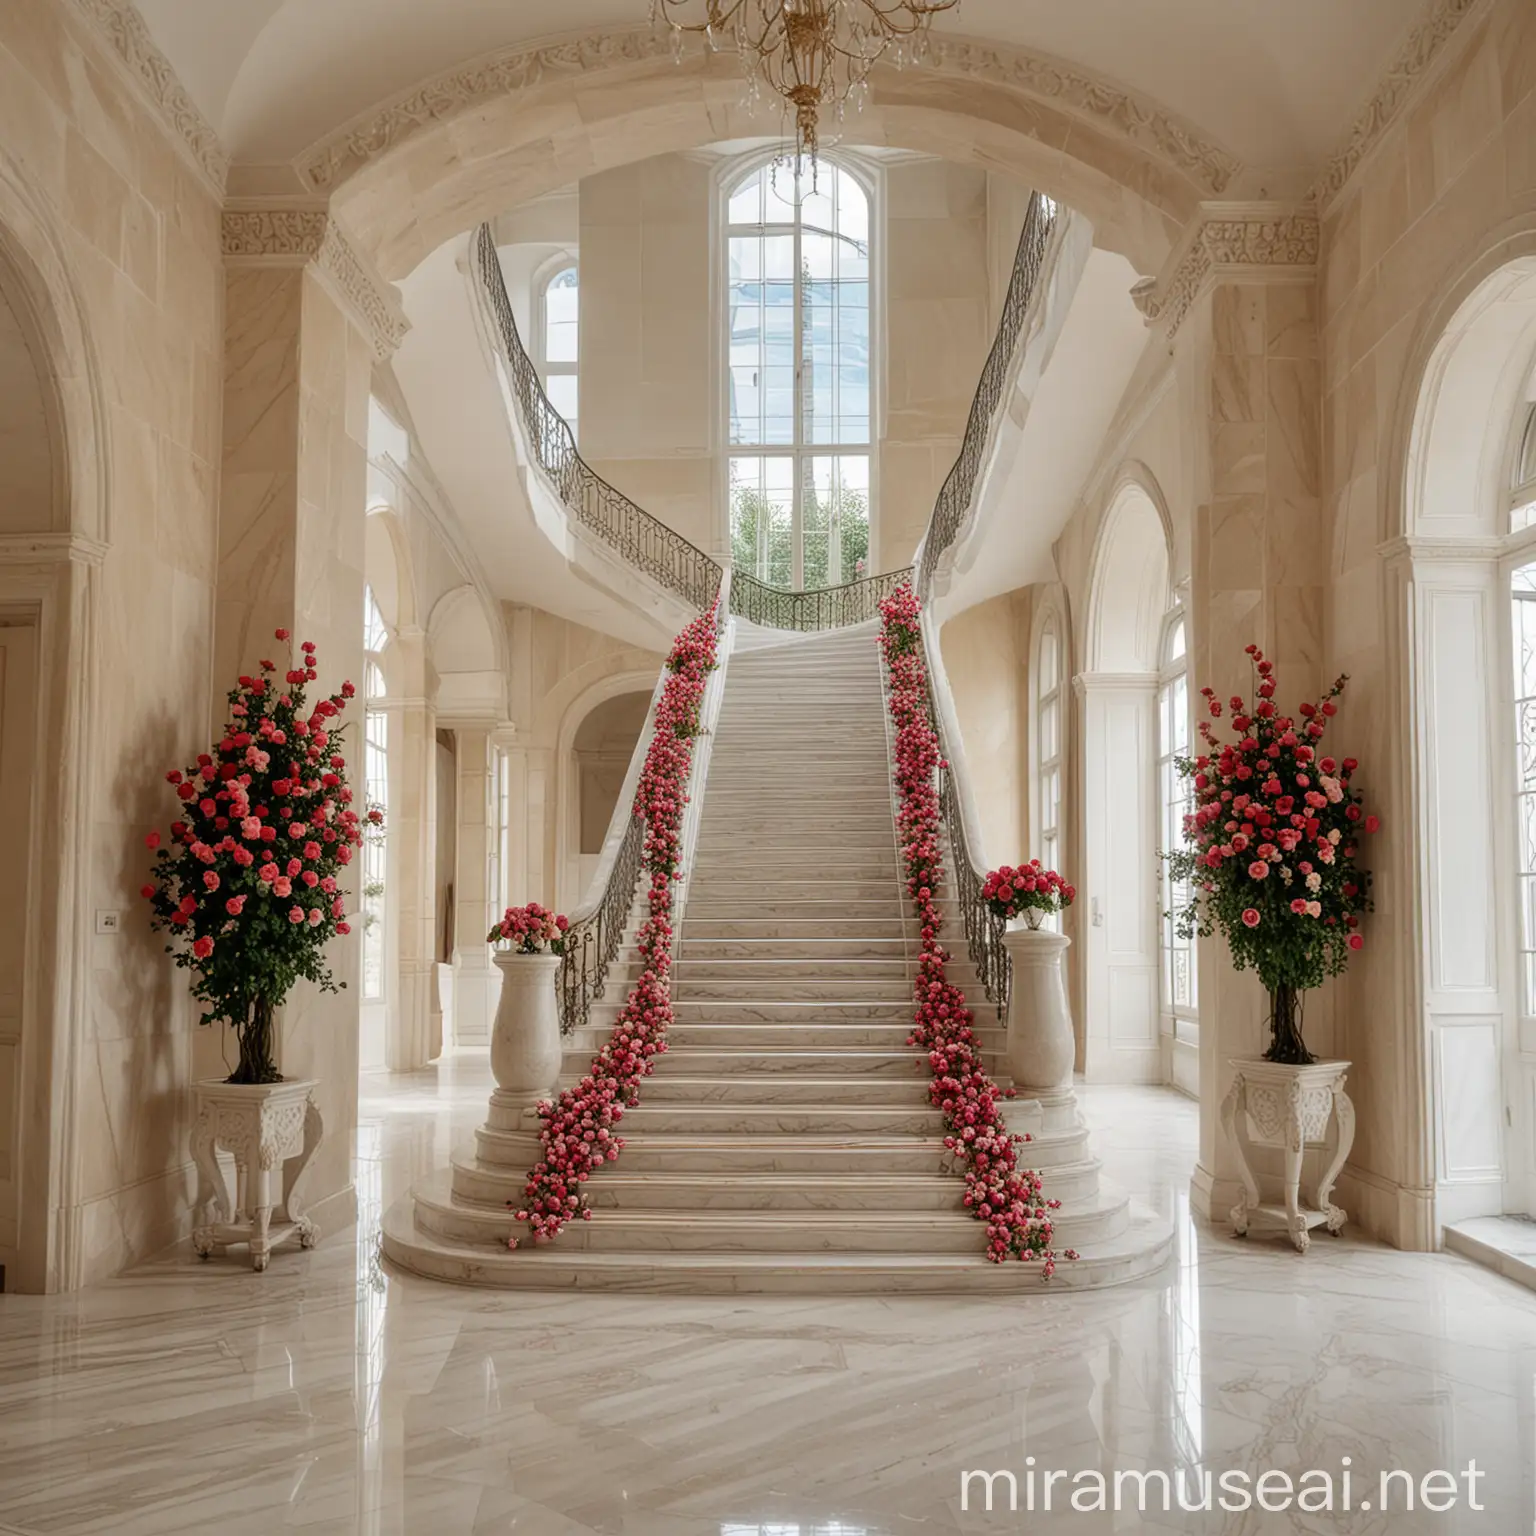 Large marble staircase, very beautiful, and in the background, large windows and a grand corridor can be seen. All made of marble with some roses and a vine.